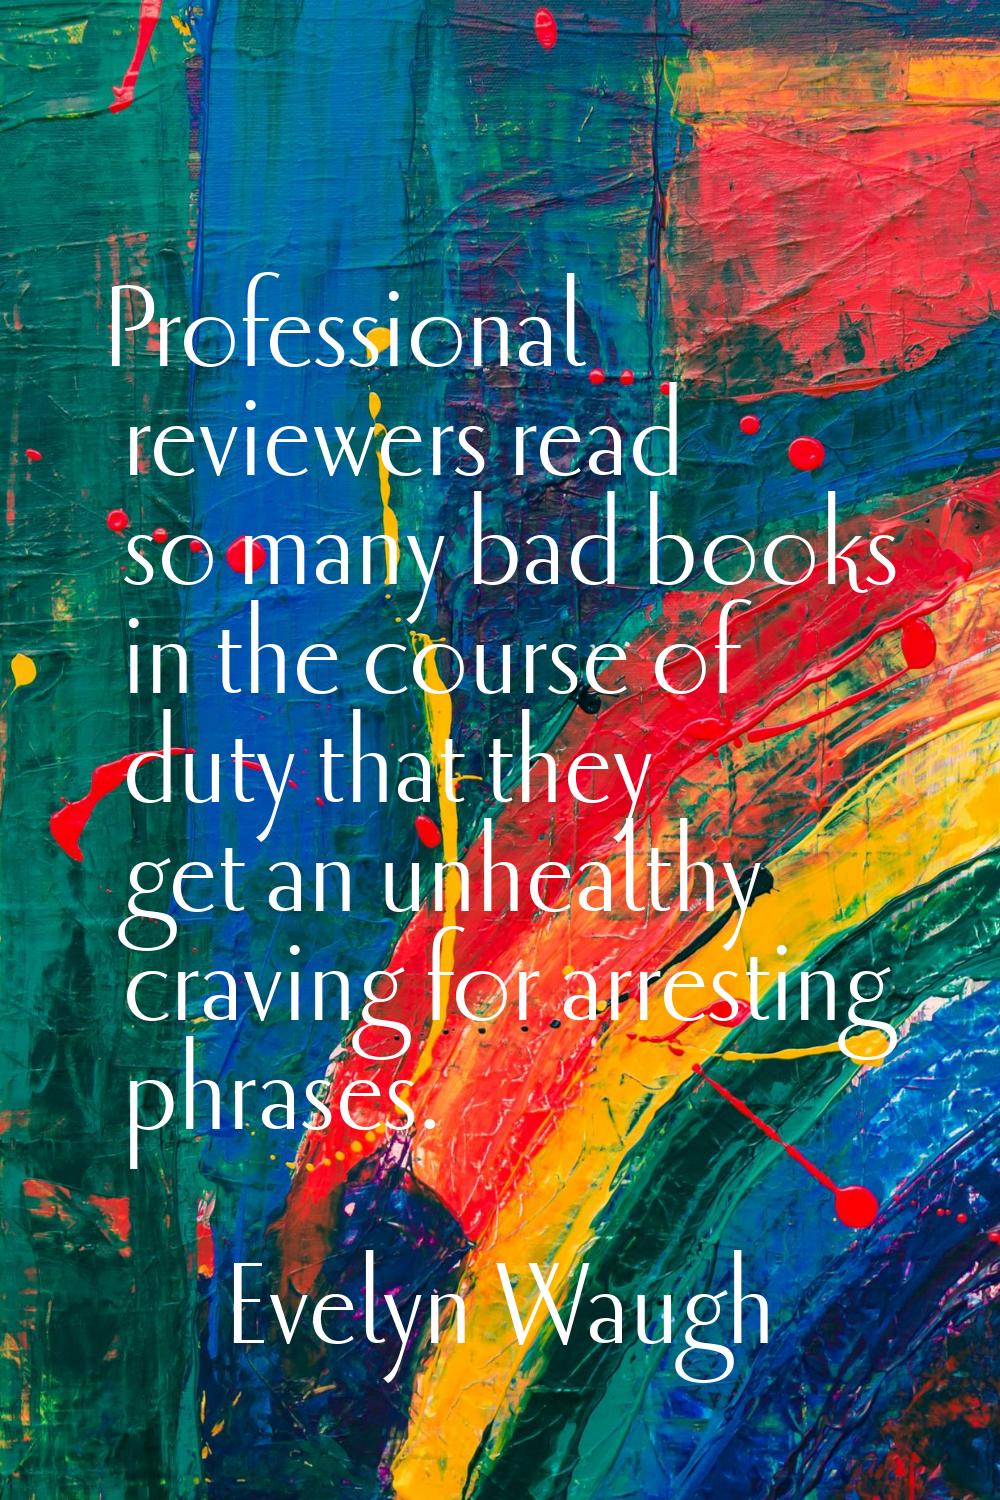 Professional reviewers read so many bad books in the course of duty that they get an unhealthy crav